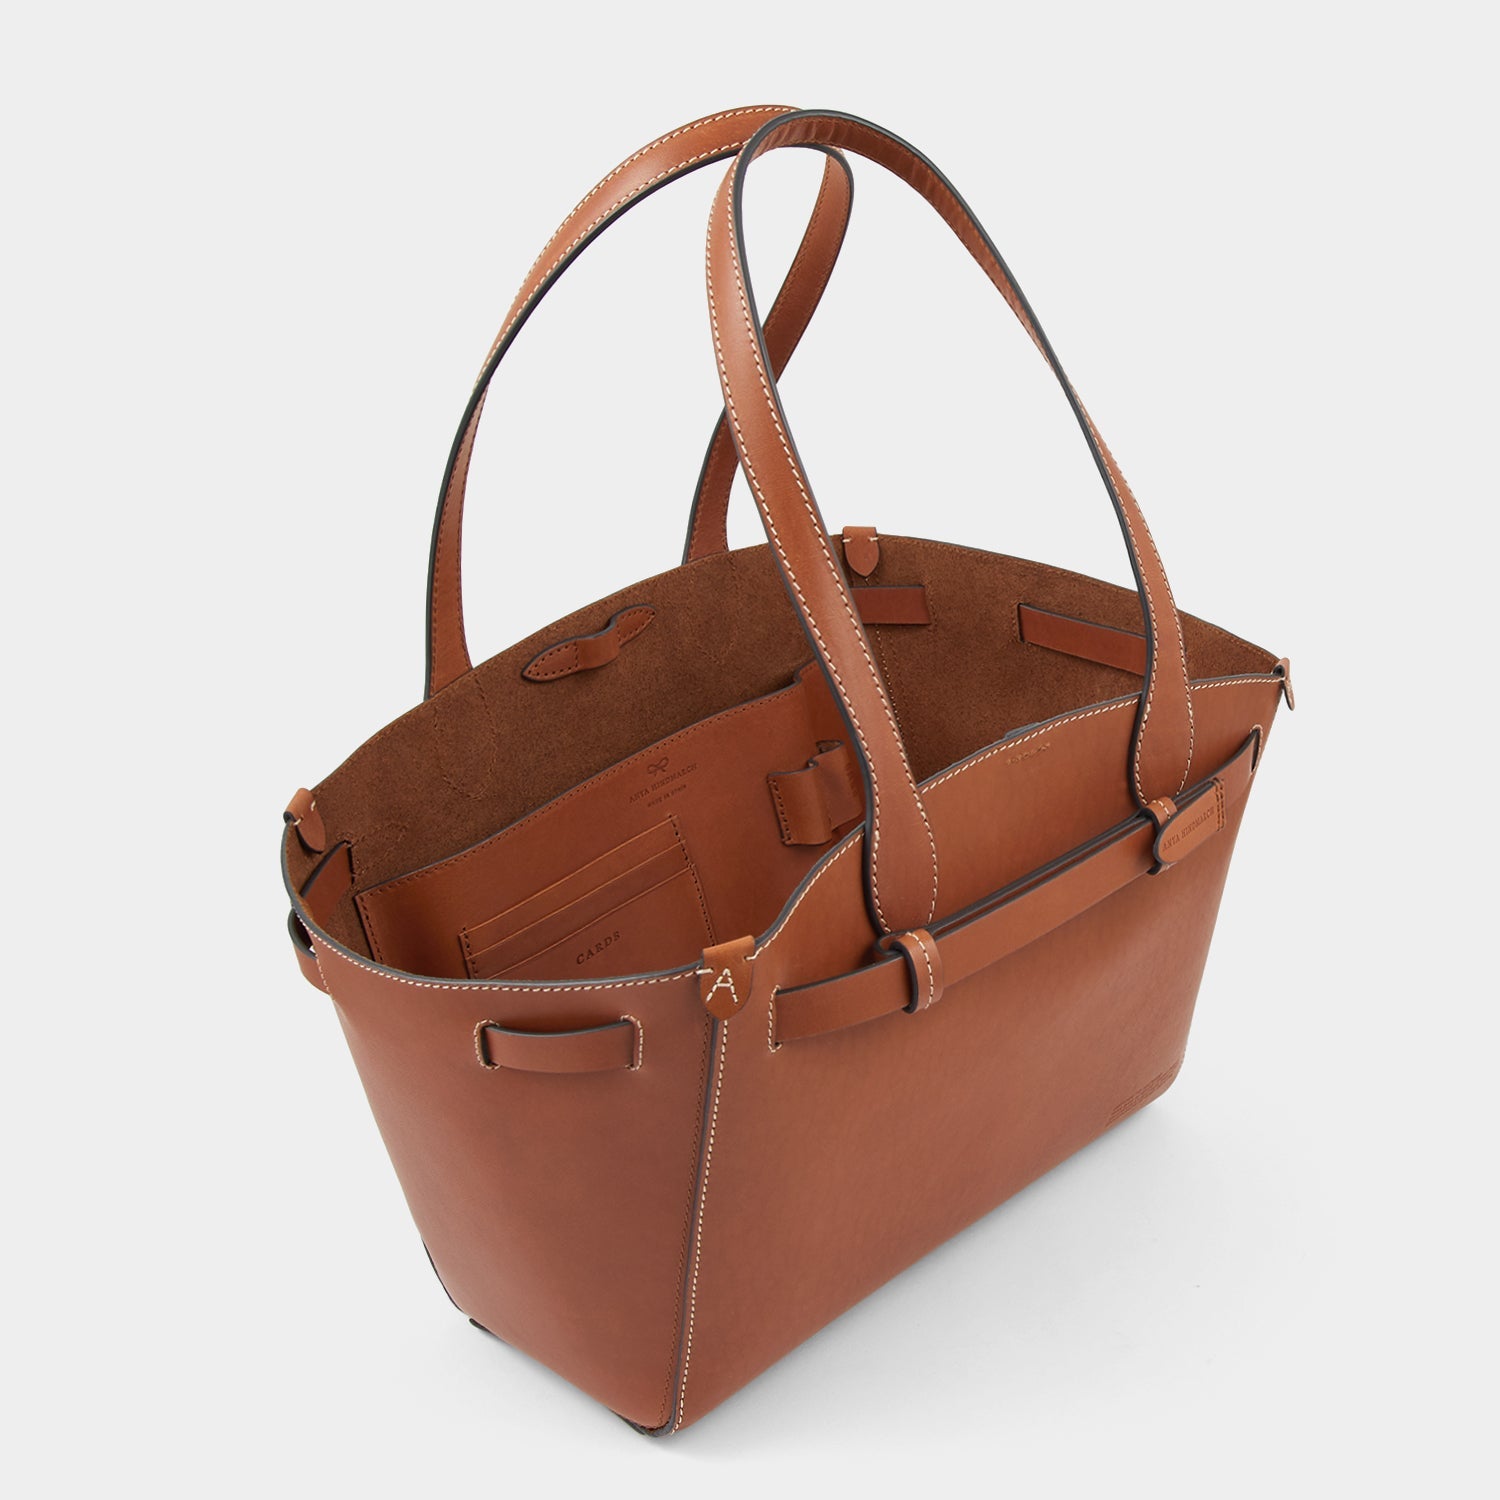 Return to Nature Small Tote